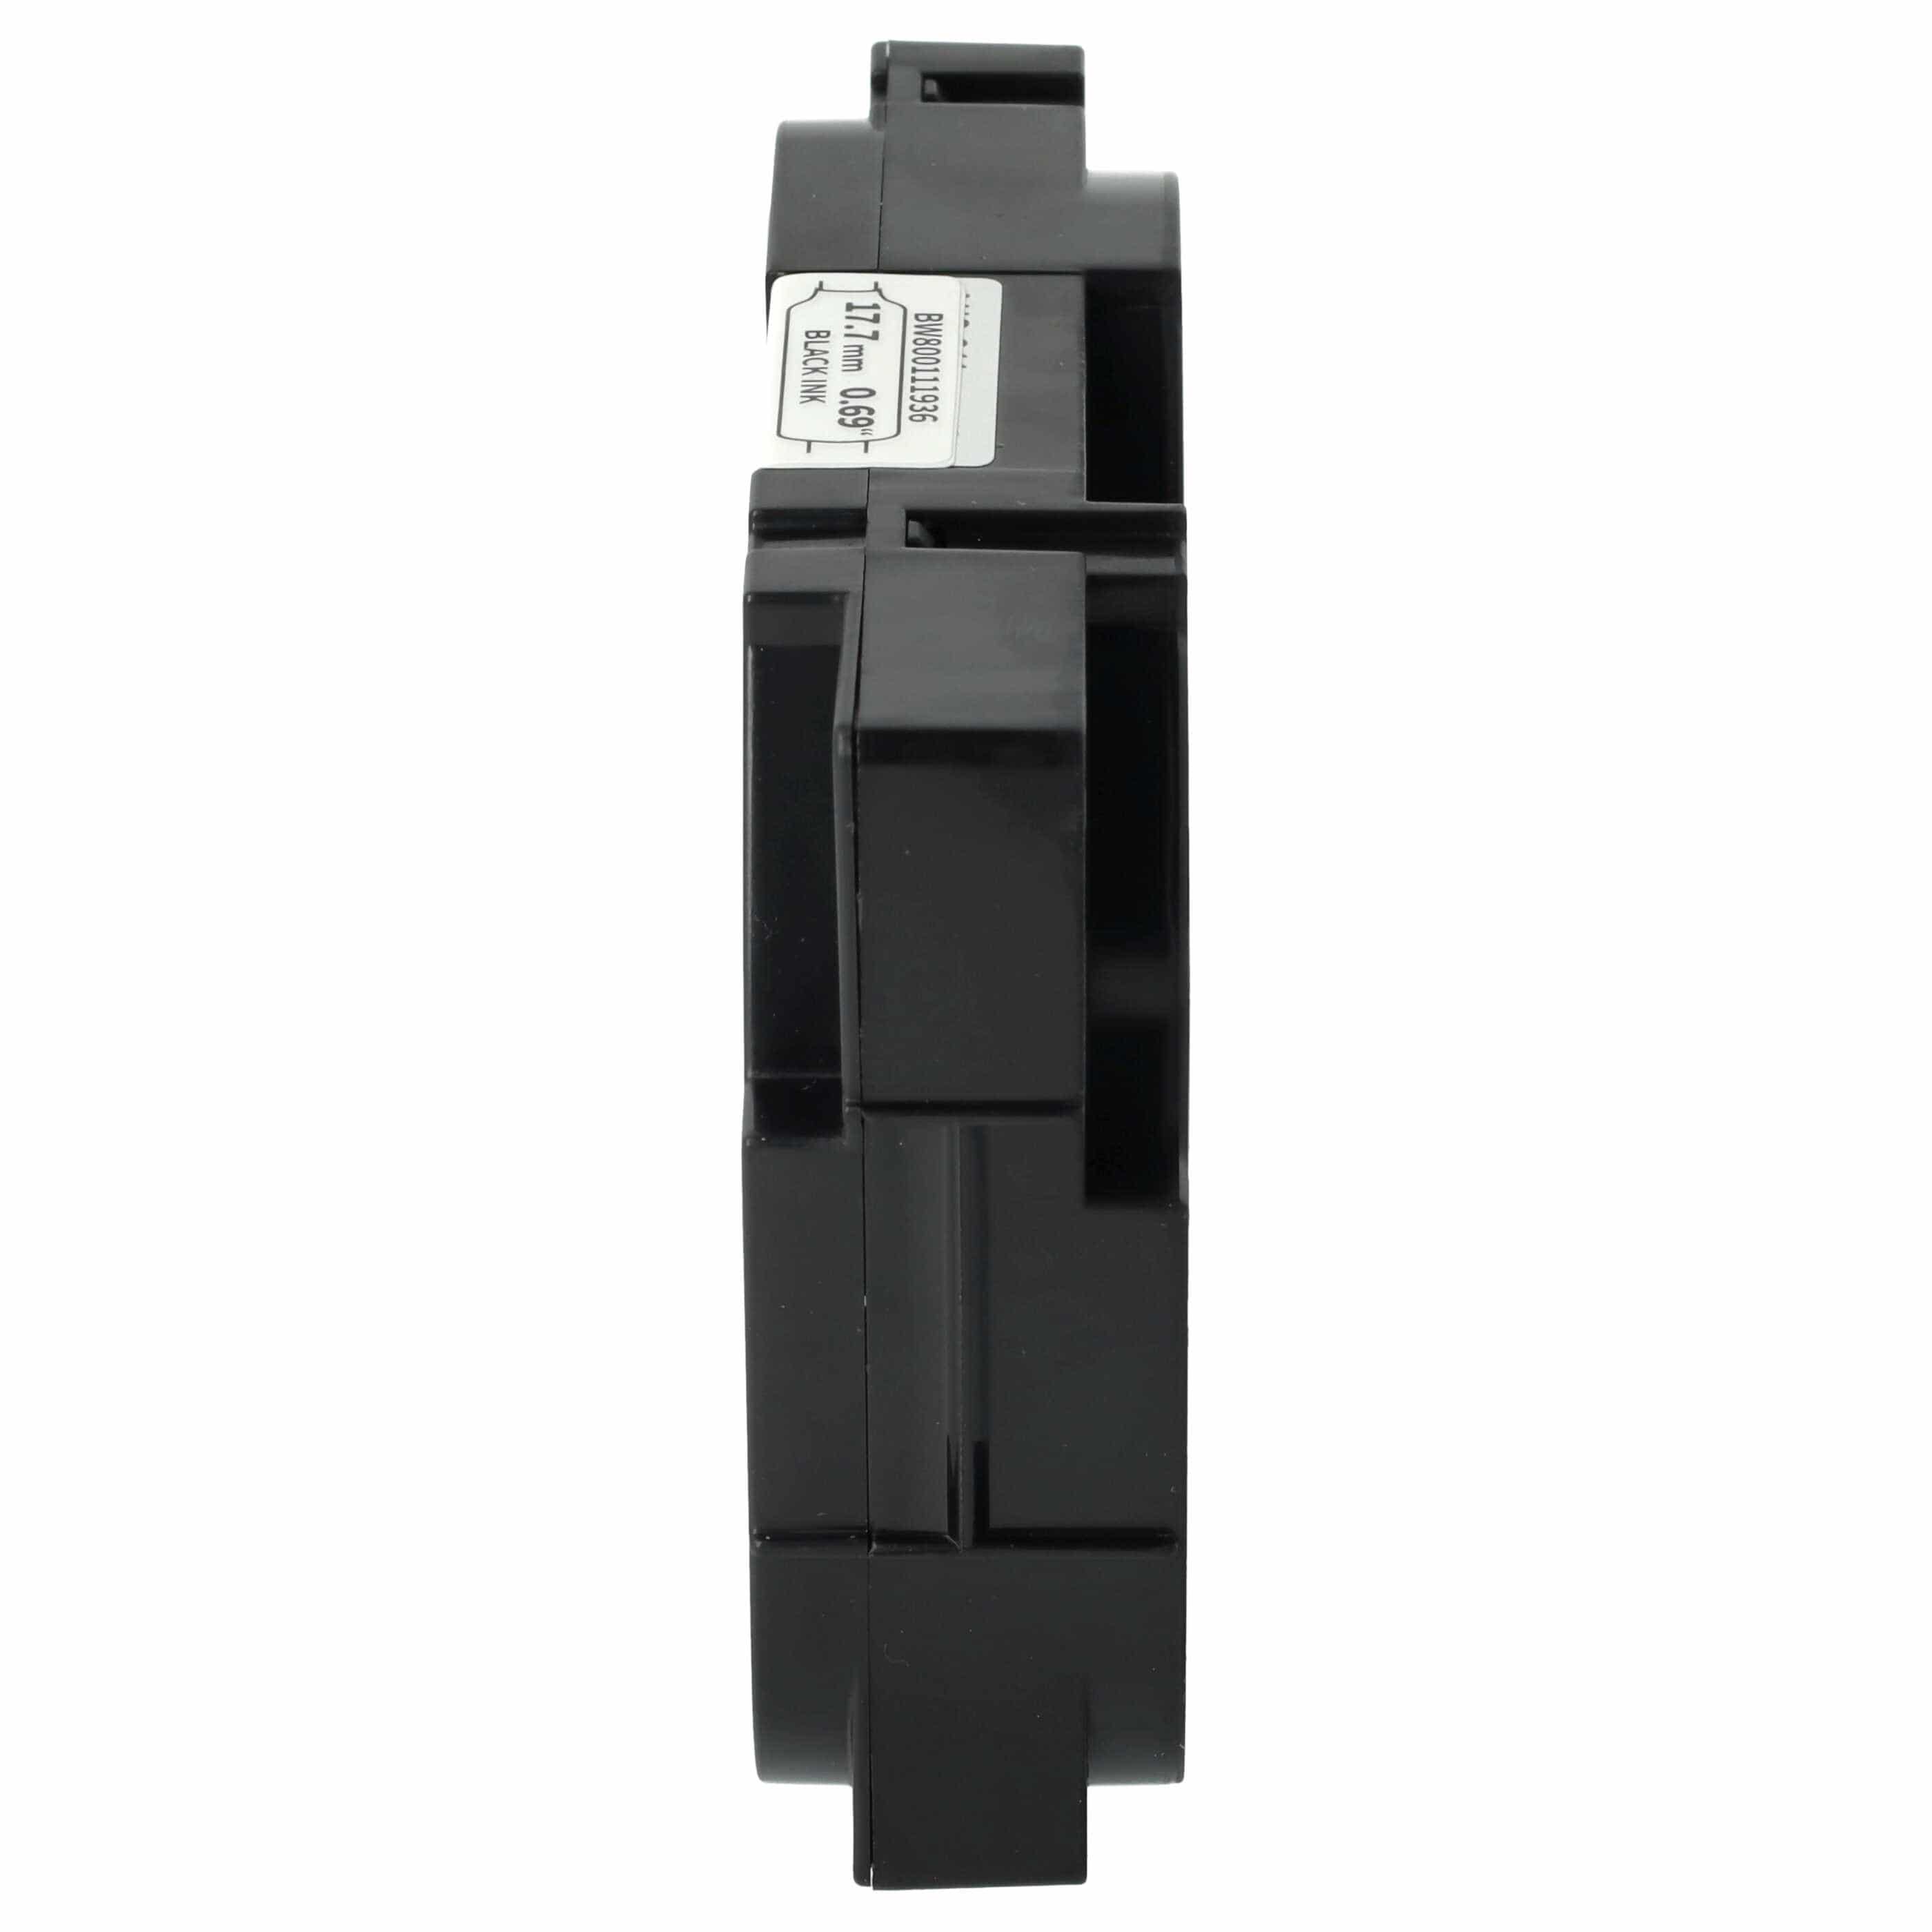 Label Tape as Replacement for Brother HSE-241 - Black to White, Heat Shrink Tape, 17.7 mm